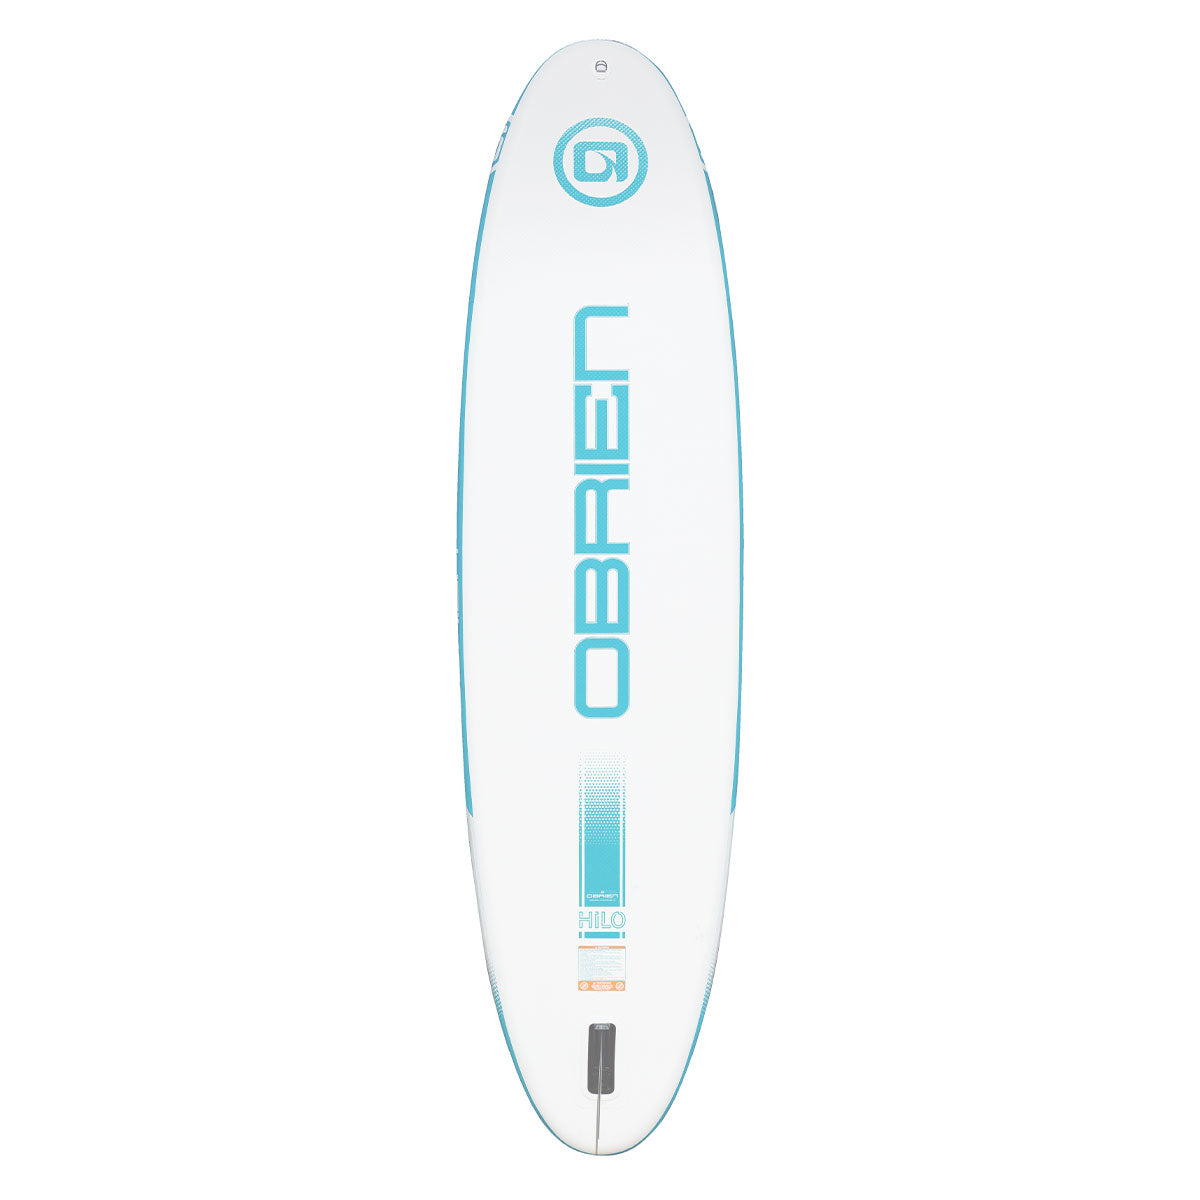 O'Brien Hilo Inflatable Stand Up Paddleboard Package -10' 6"